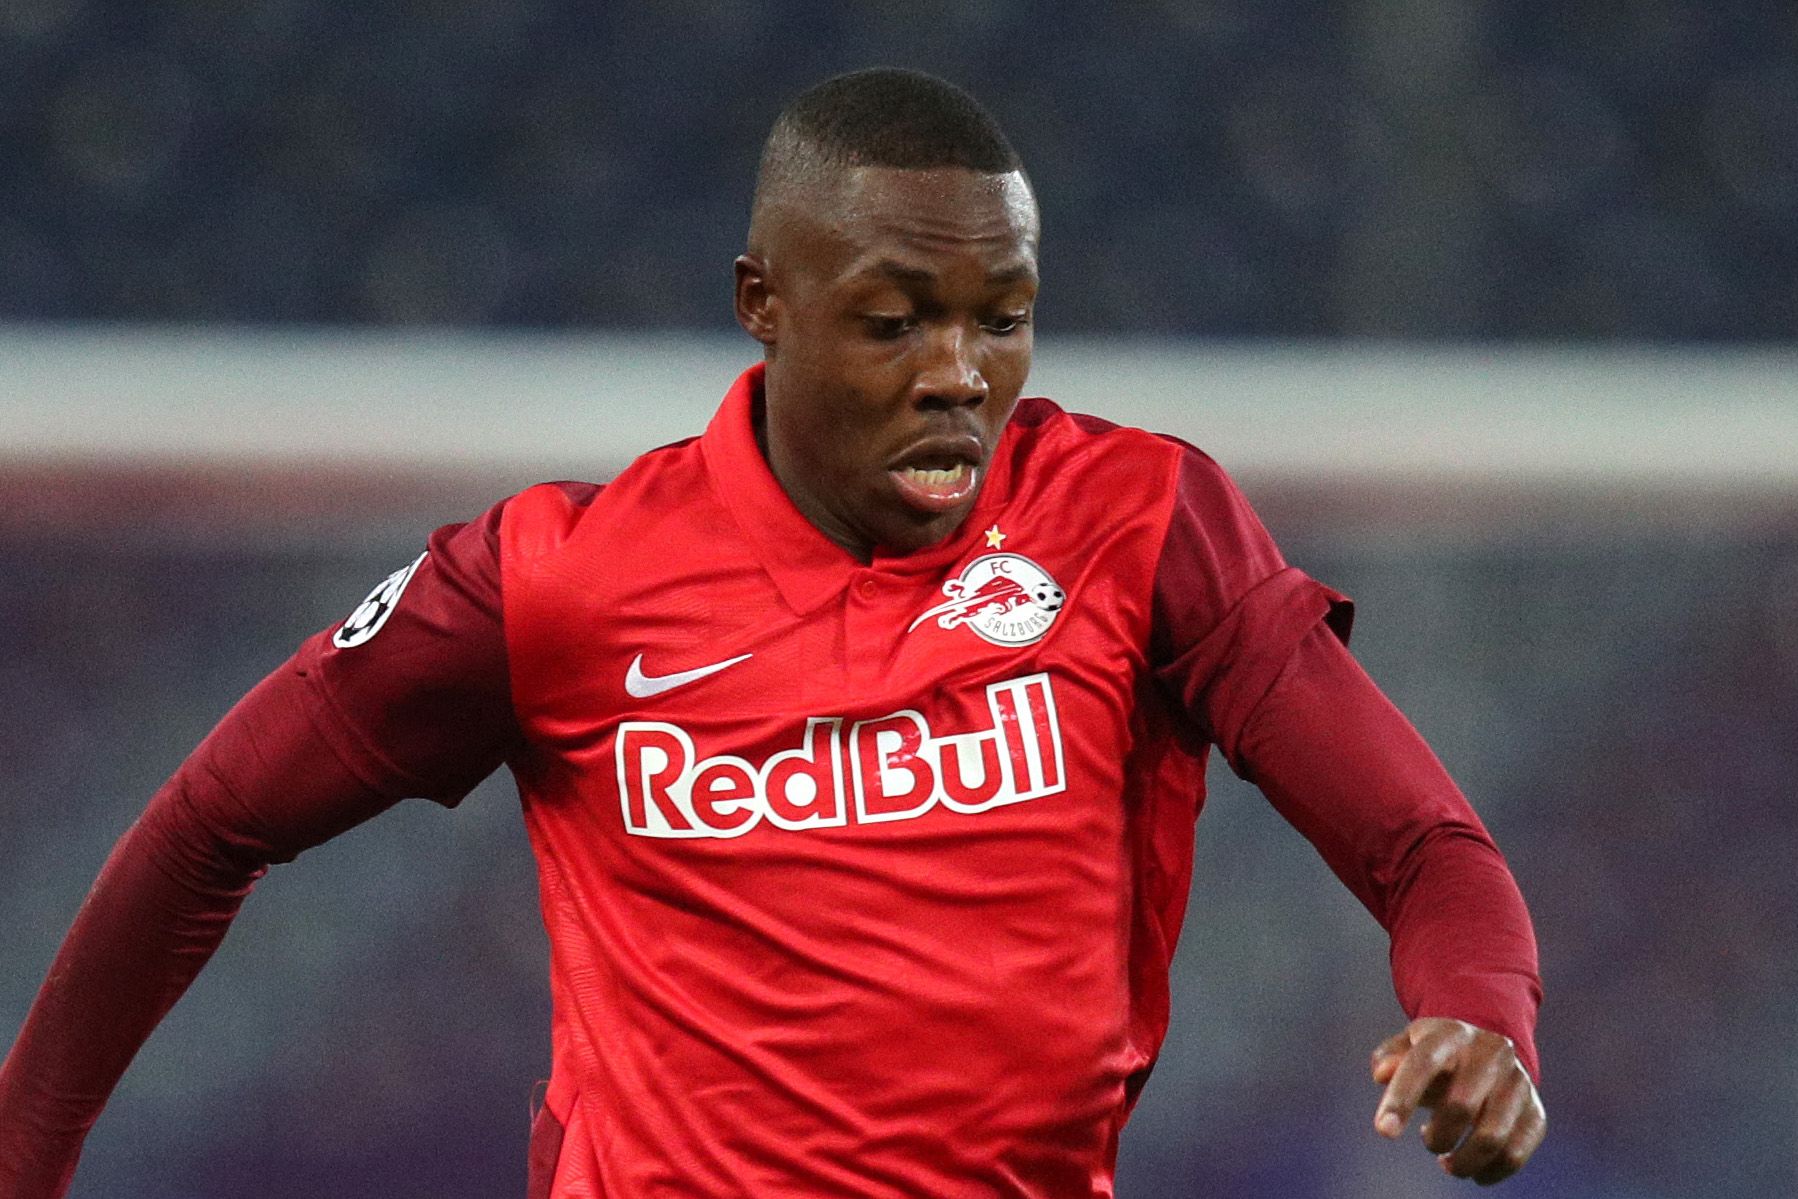 Brighton midfielder Mwepu ends his career at 24 because of heart problems